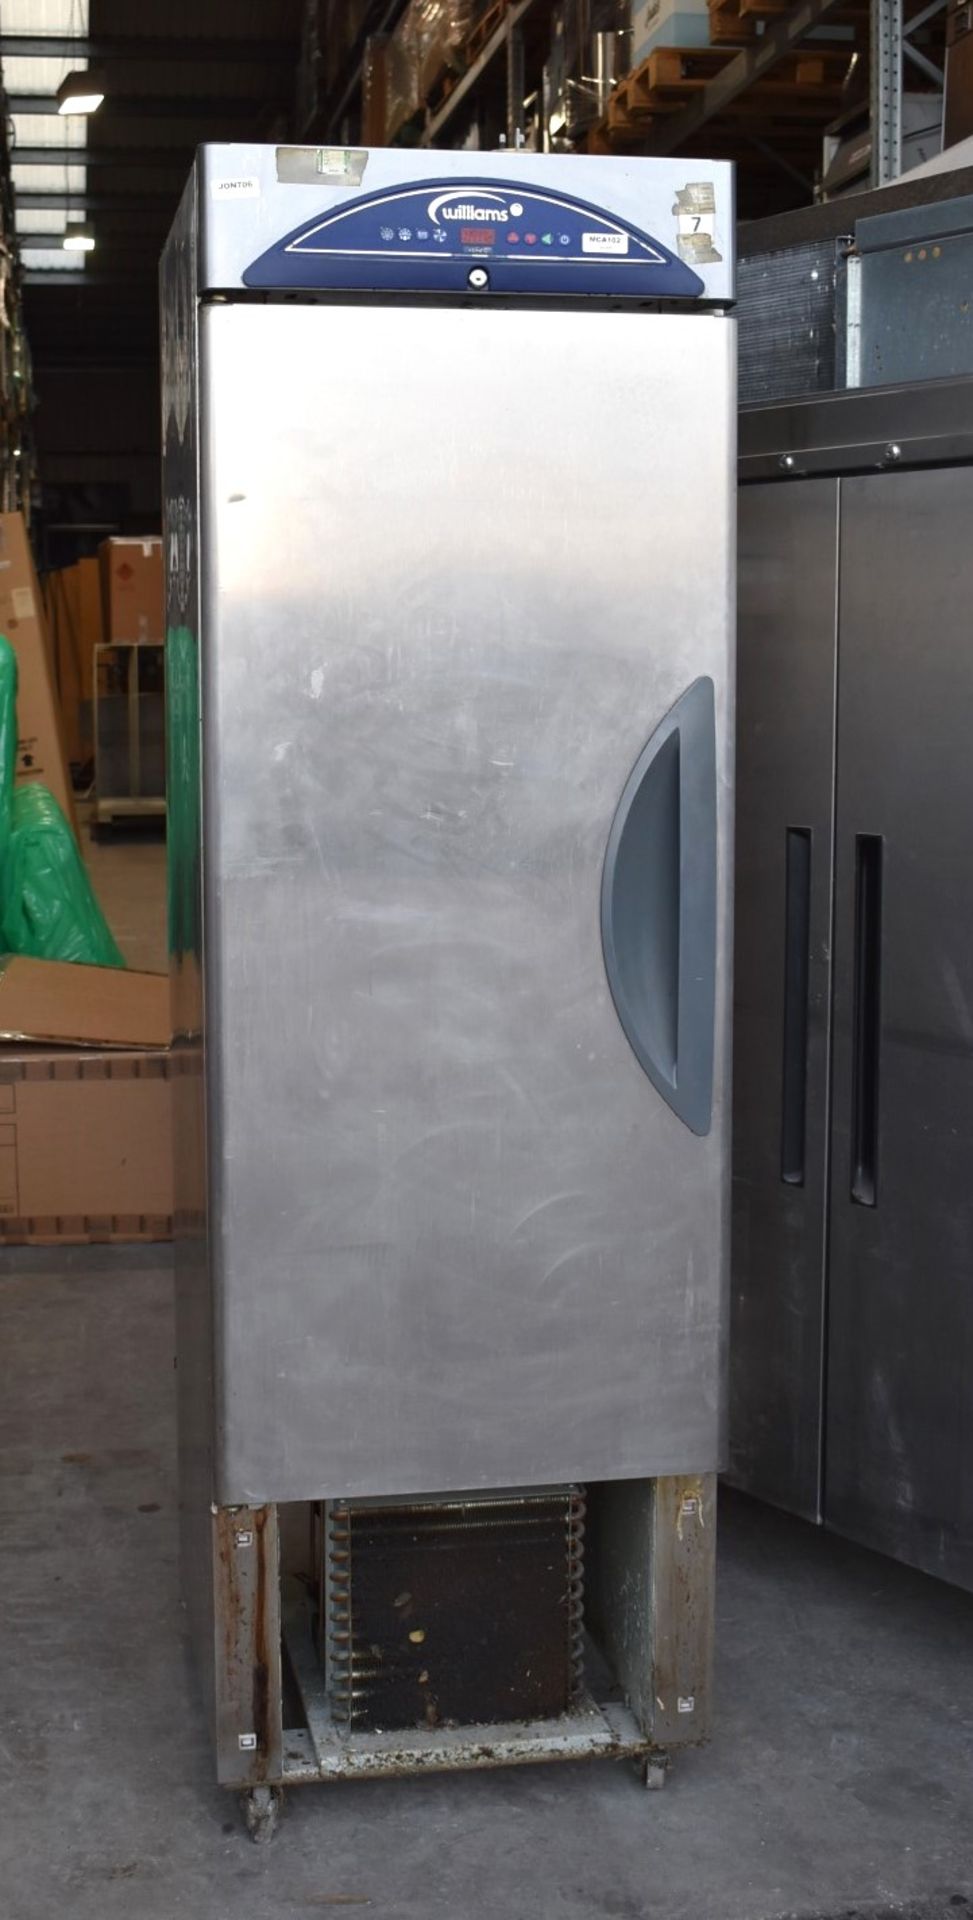 1 x Williams HZ12 Upright Single Door Refrigerator - Recently Removed From a Working Environment -